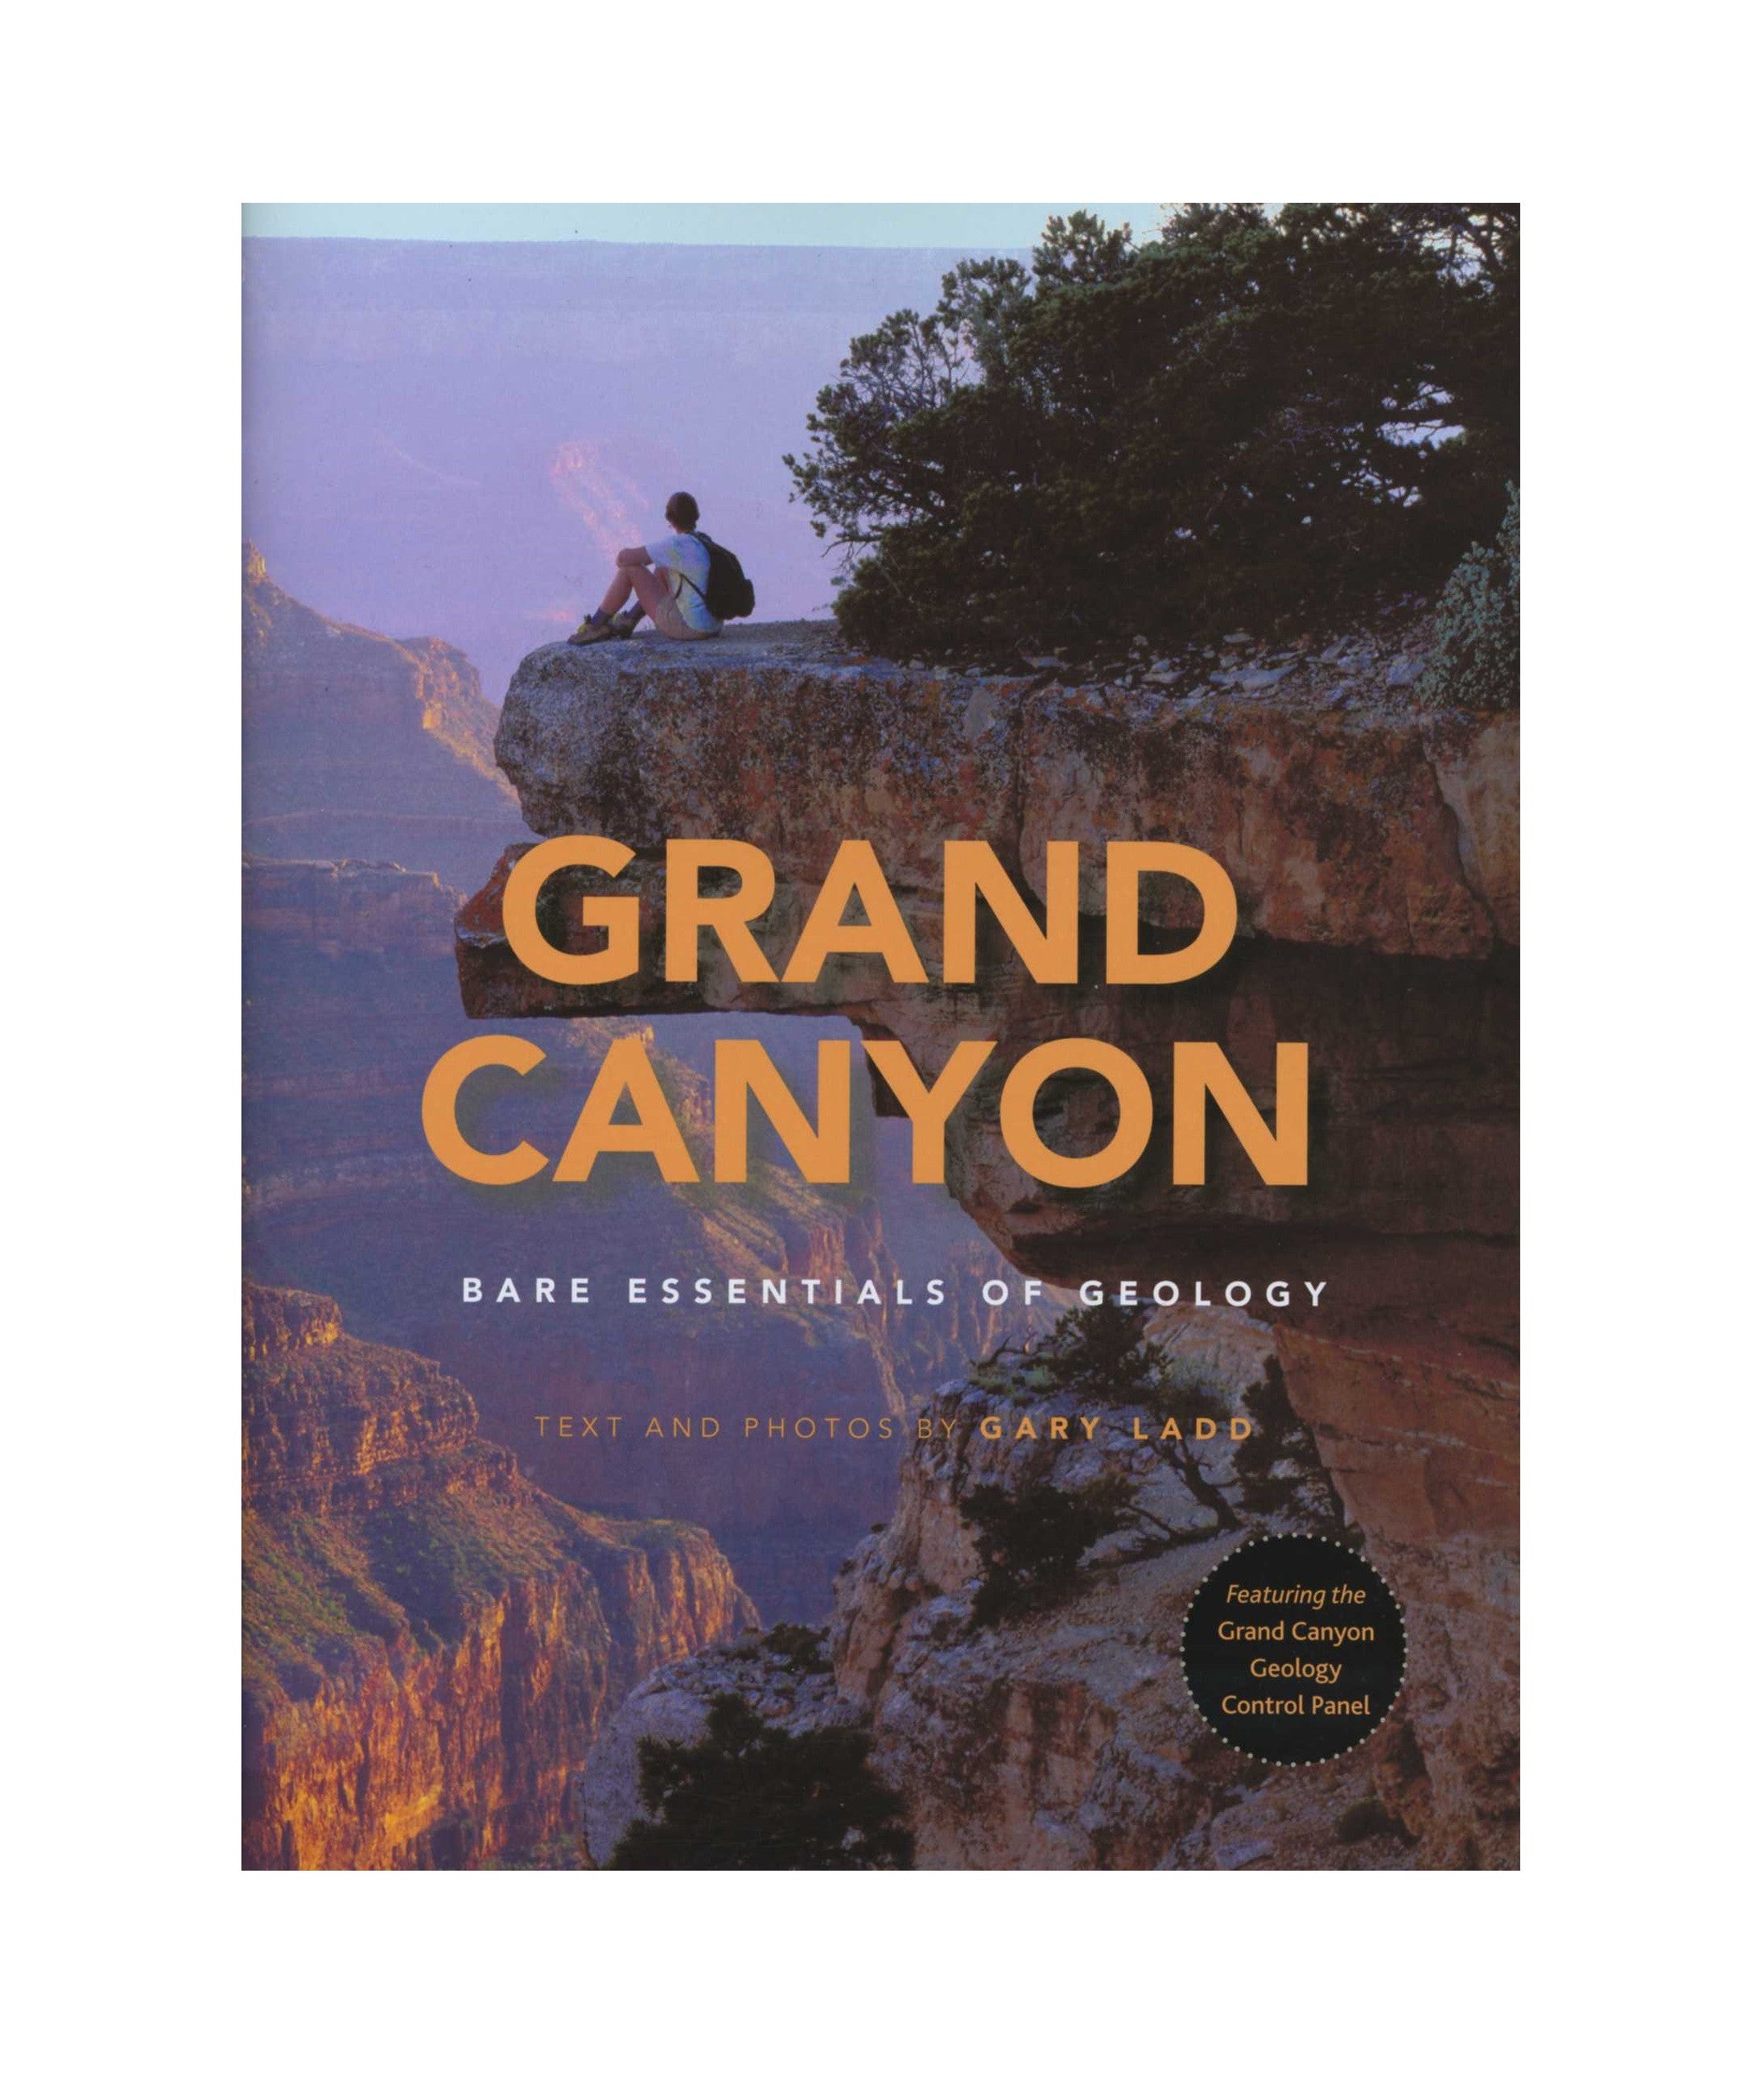 Grand Canyon Bare Essentials of Geology